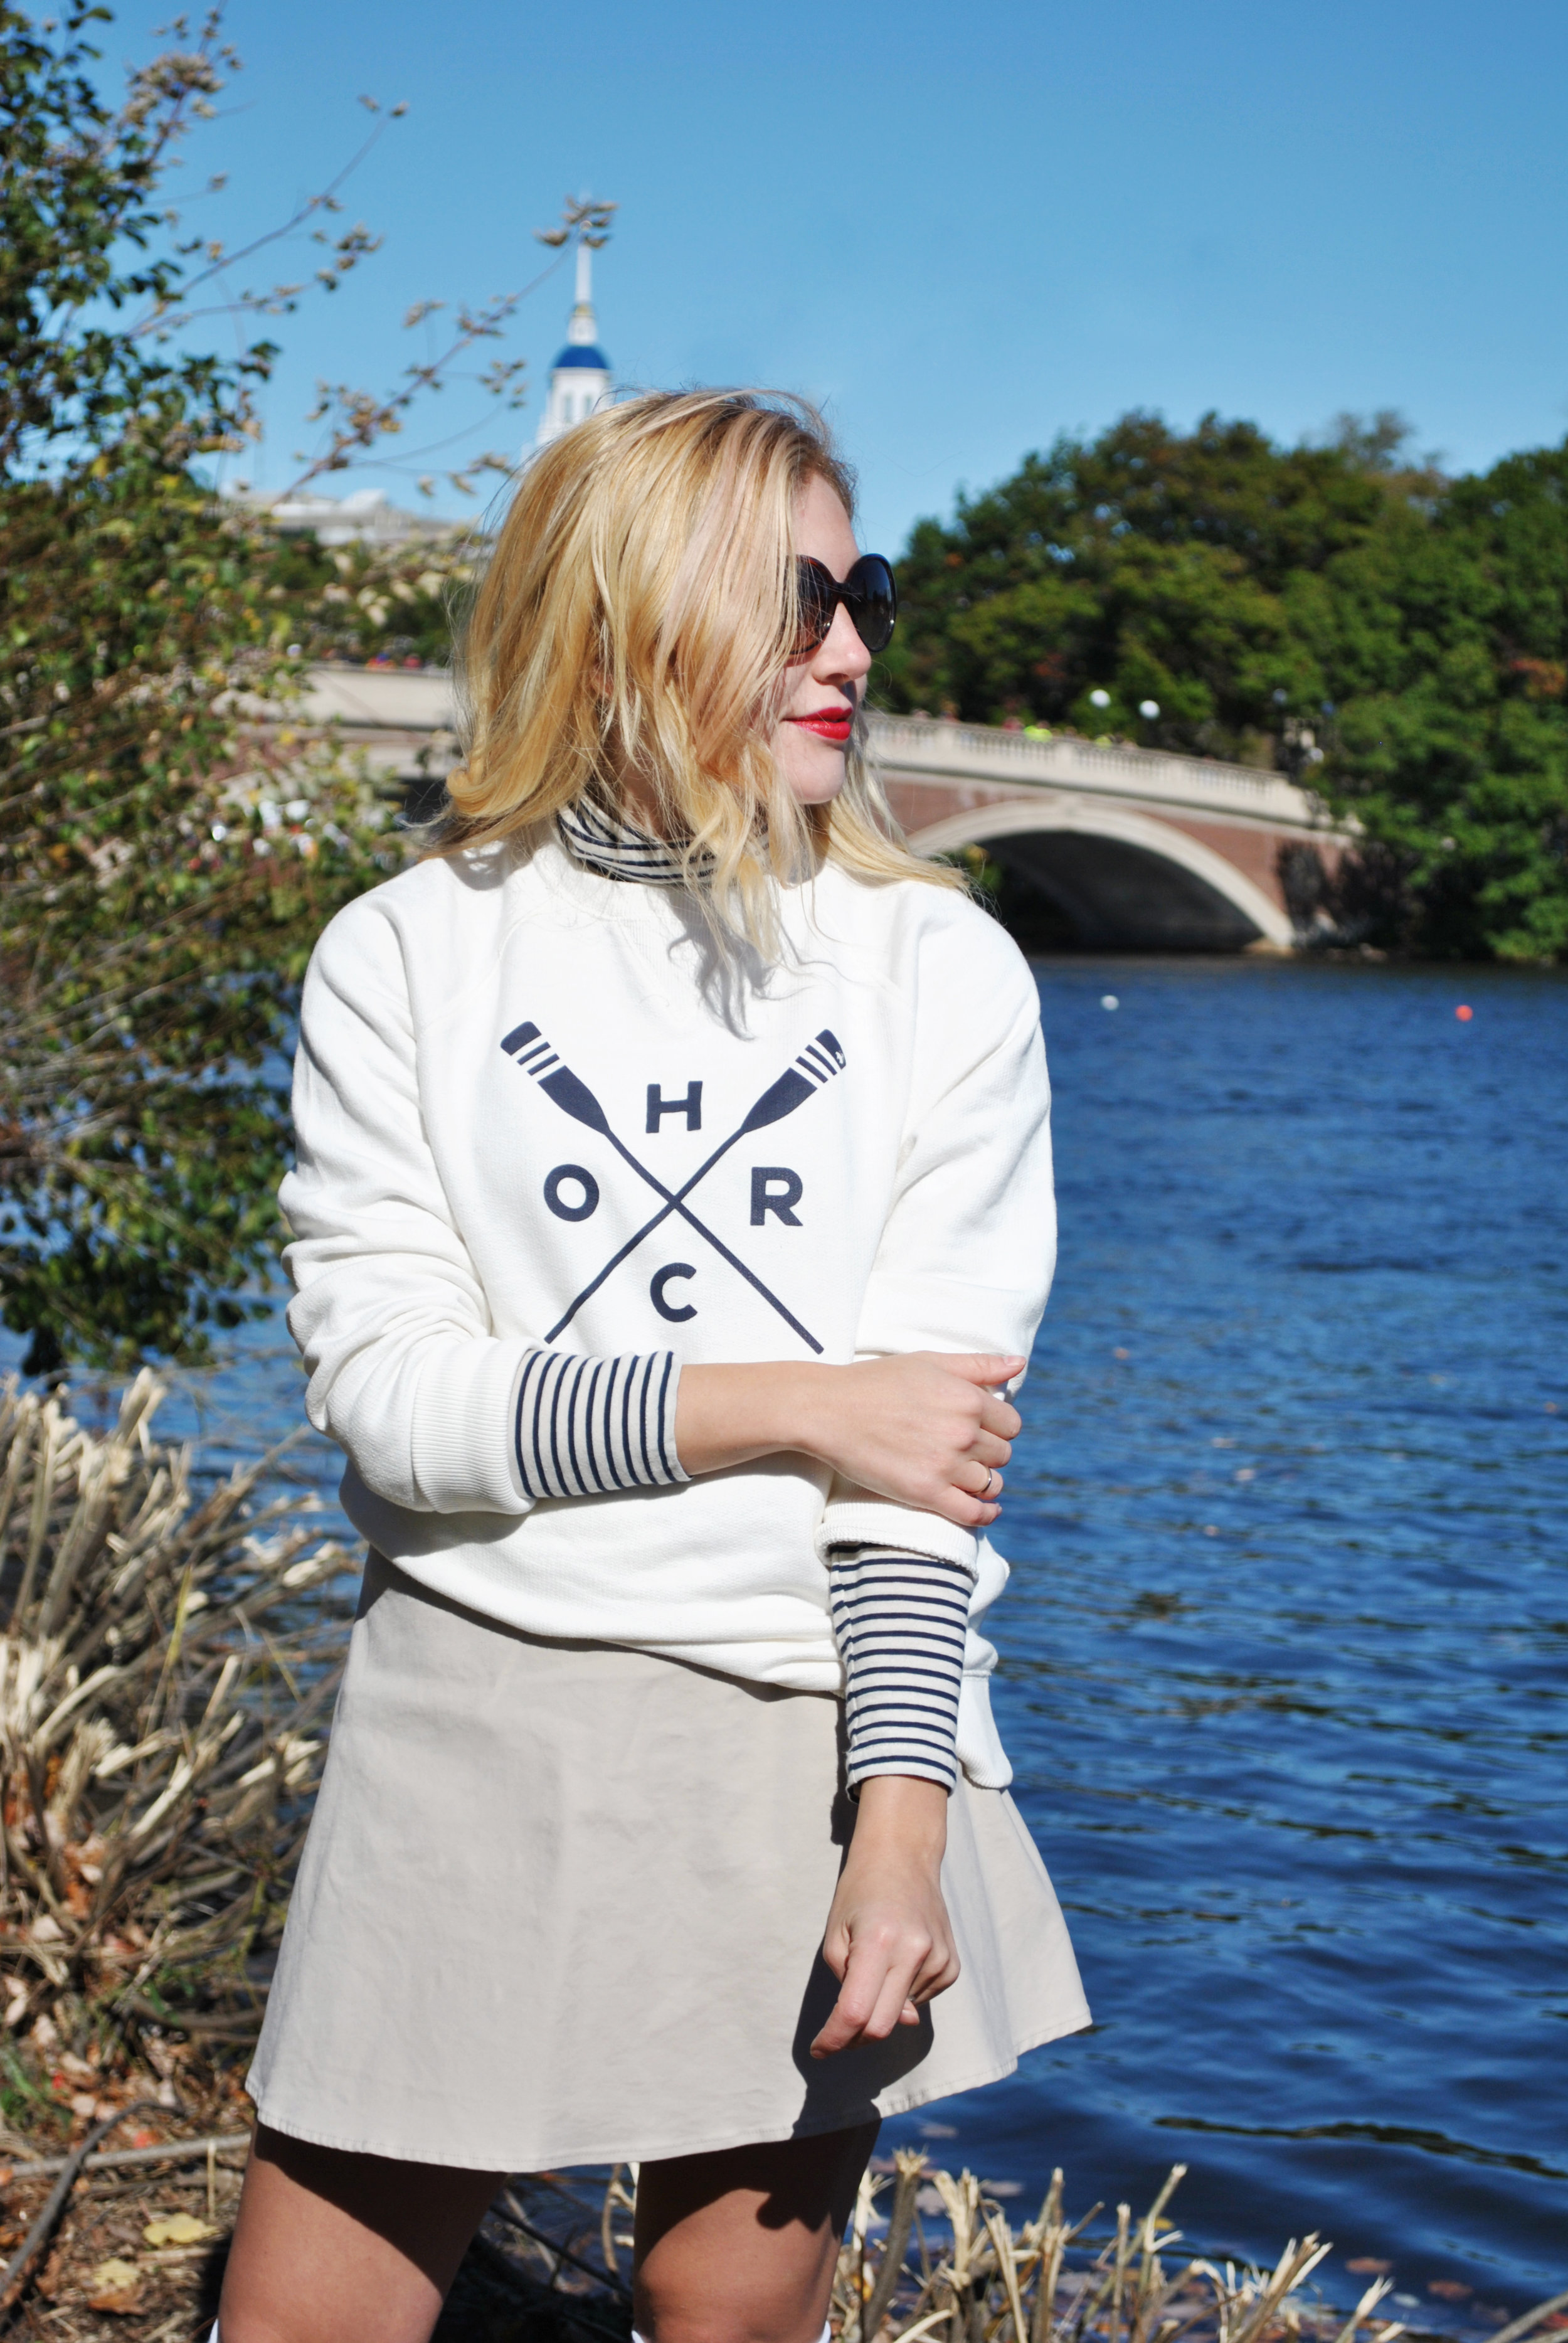 thoughtfulwish | BBHOCR // head of the charles // boston fashion // new england fashion // fall outfit // rowing // charles river // preppy // fashion // fblog // meredith wish // simmons college